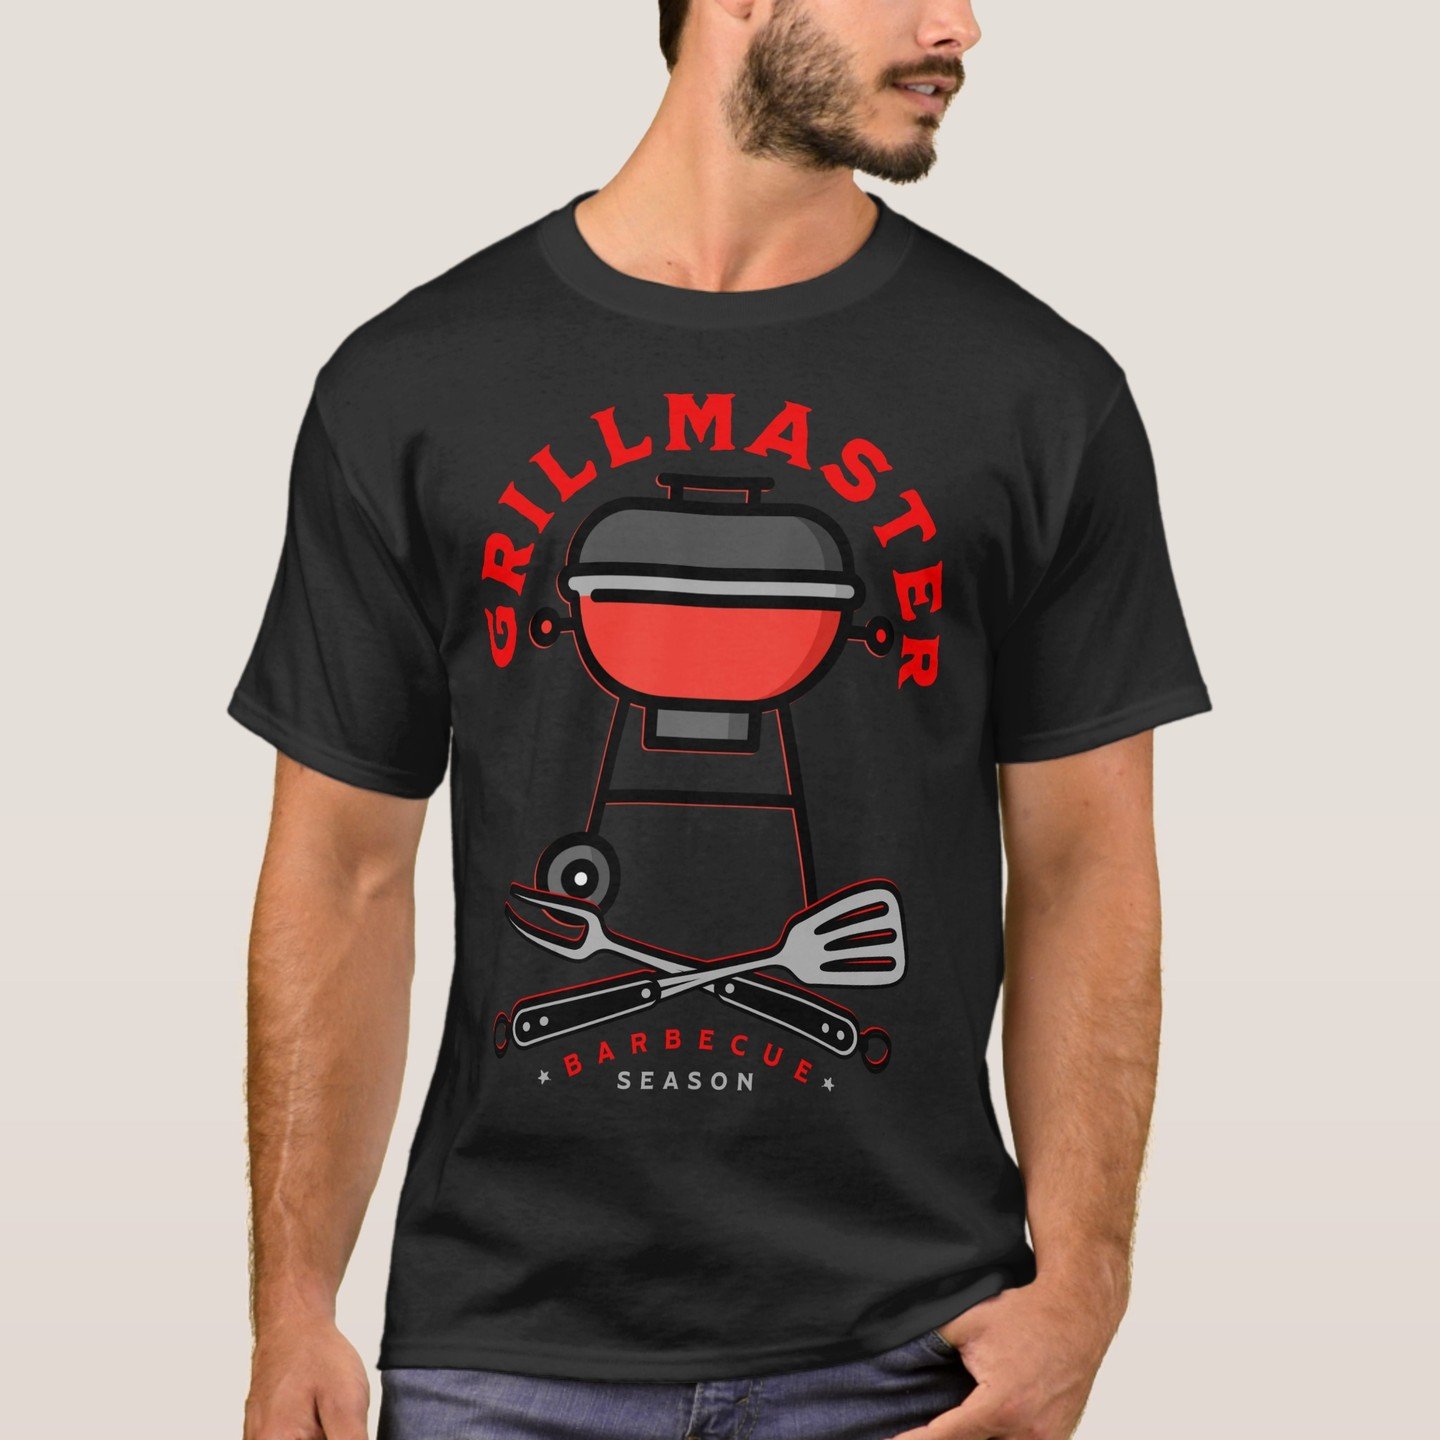 May 16th is National Barbecue Day. Celebrate with your skills as a grill master. Make a great gift for Father's Day or Mothers Day too. 😉 #linkinbio
.
#zazzle #redbubble #teepublic #zazzlemade #shirt #stickers #mugs #barbecue #grilling #nationalbarb